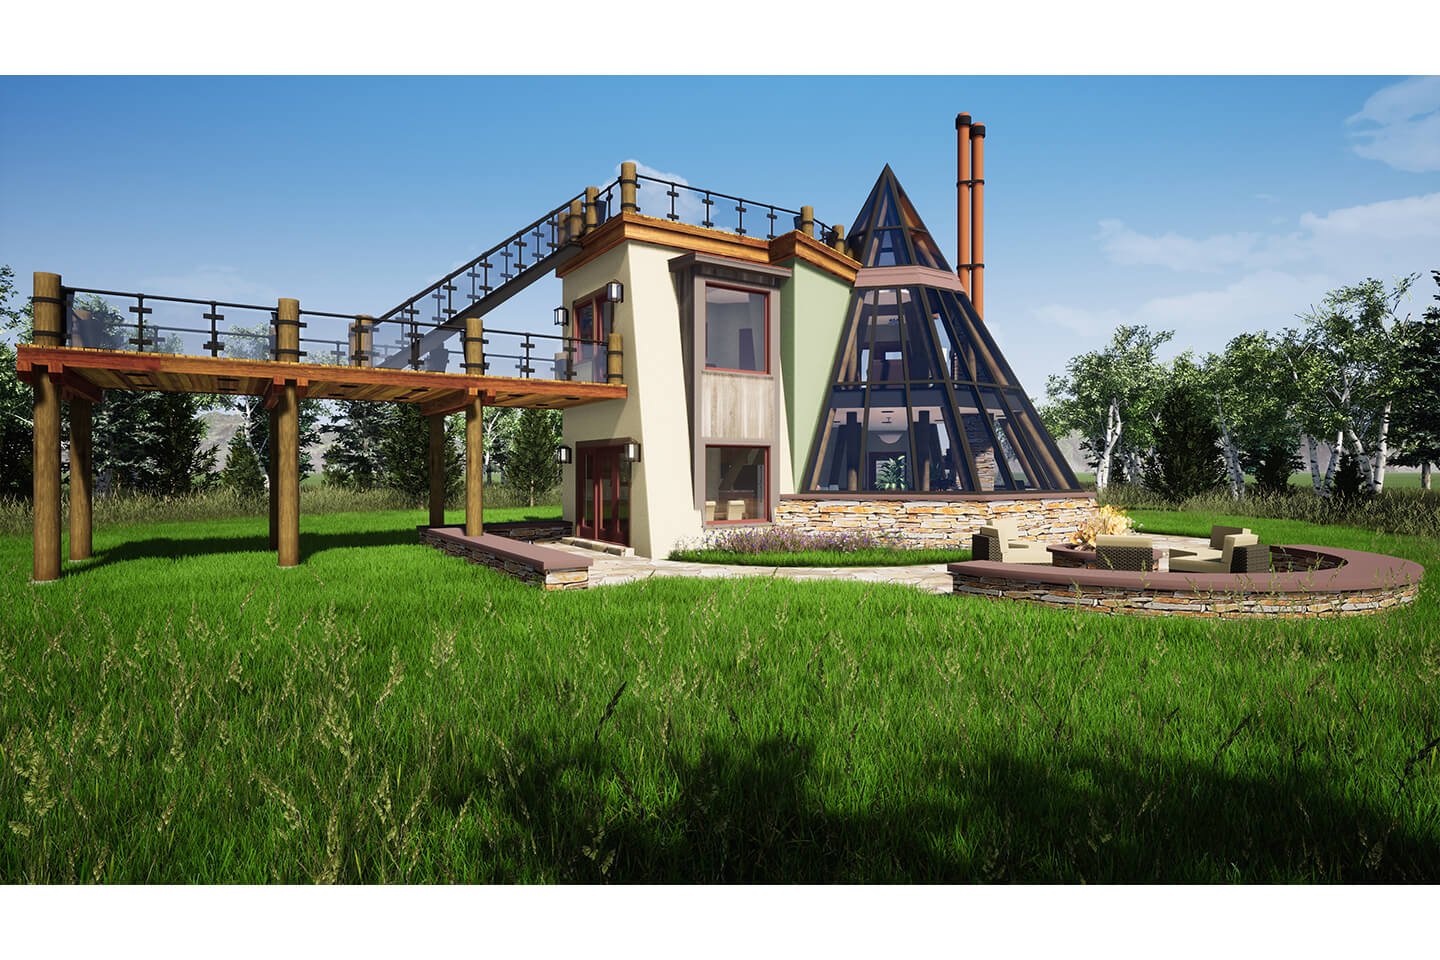 Glass teepee concept viewed from grass field